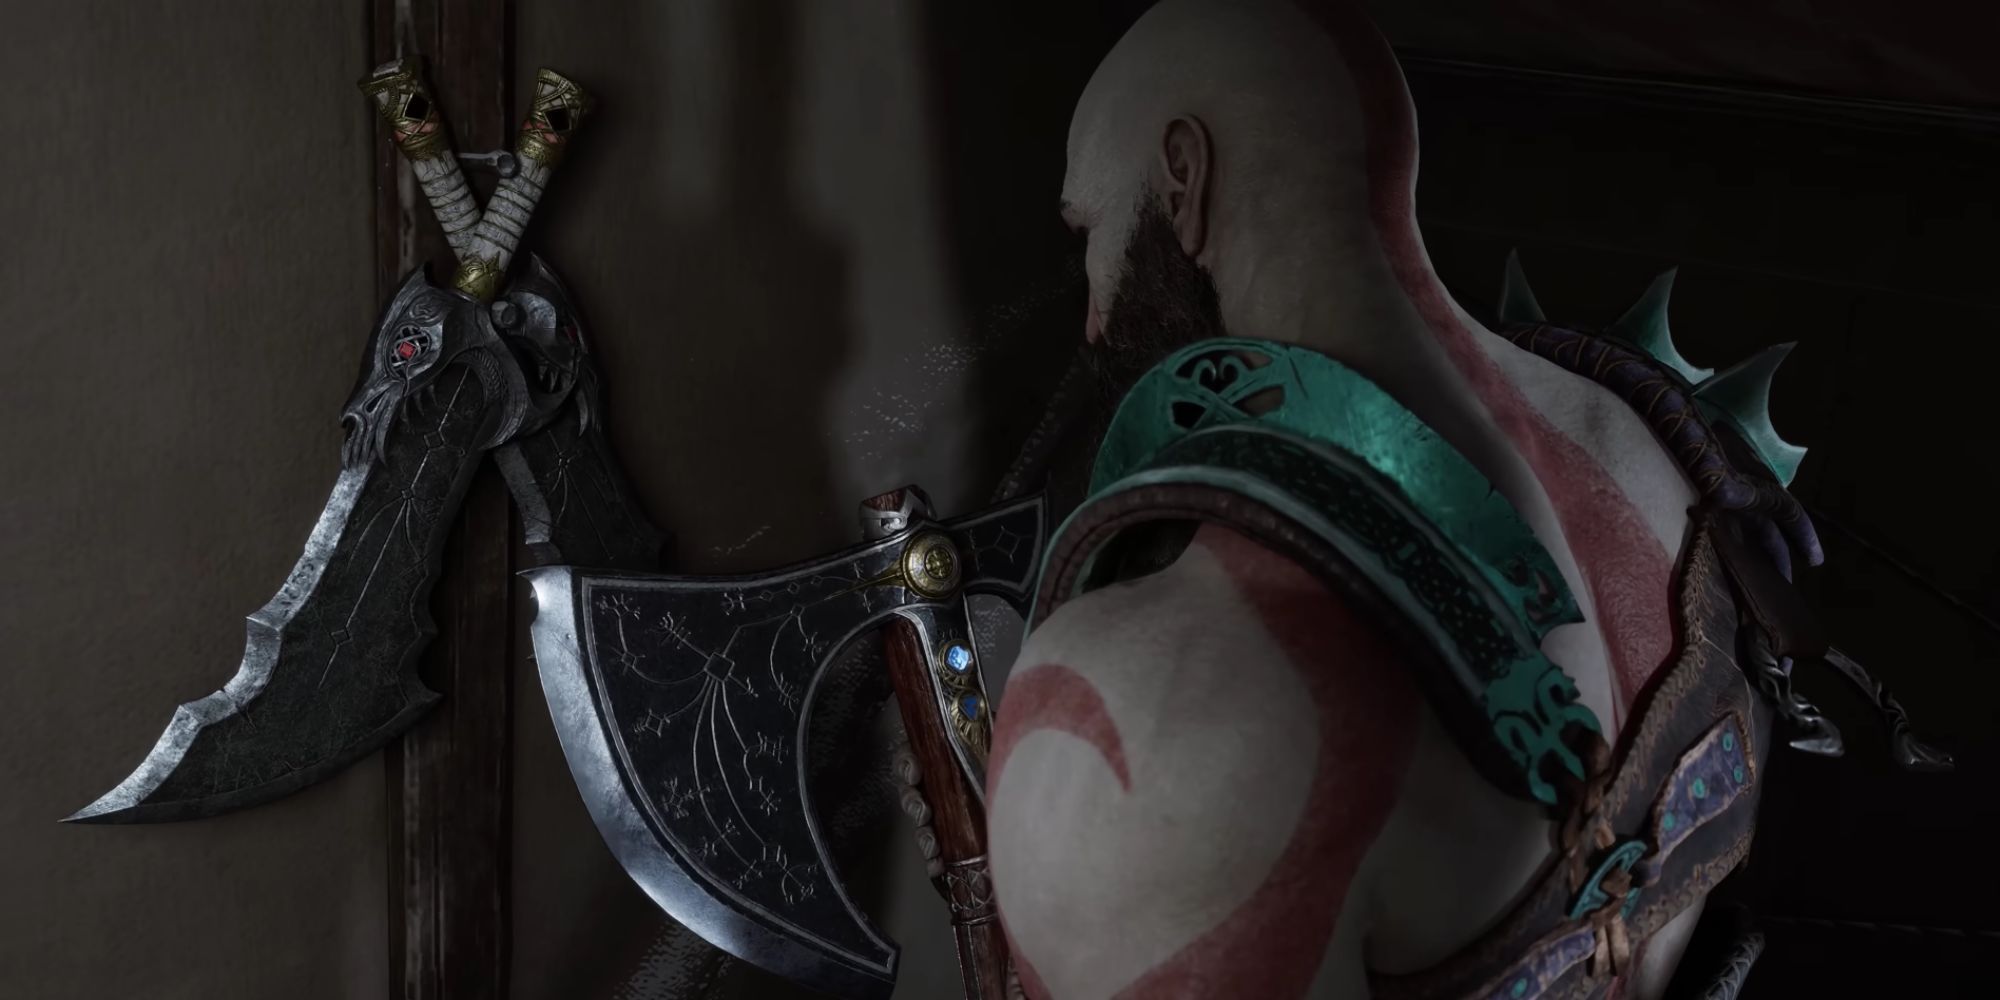 What made Leviathan Axe better than the Blade of Chaos in the God of War  game series? - Quora